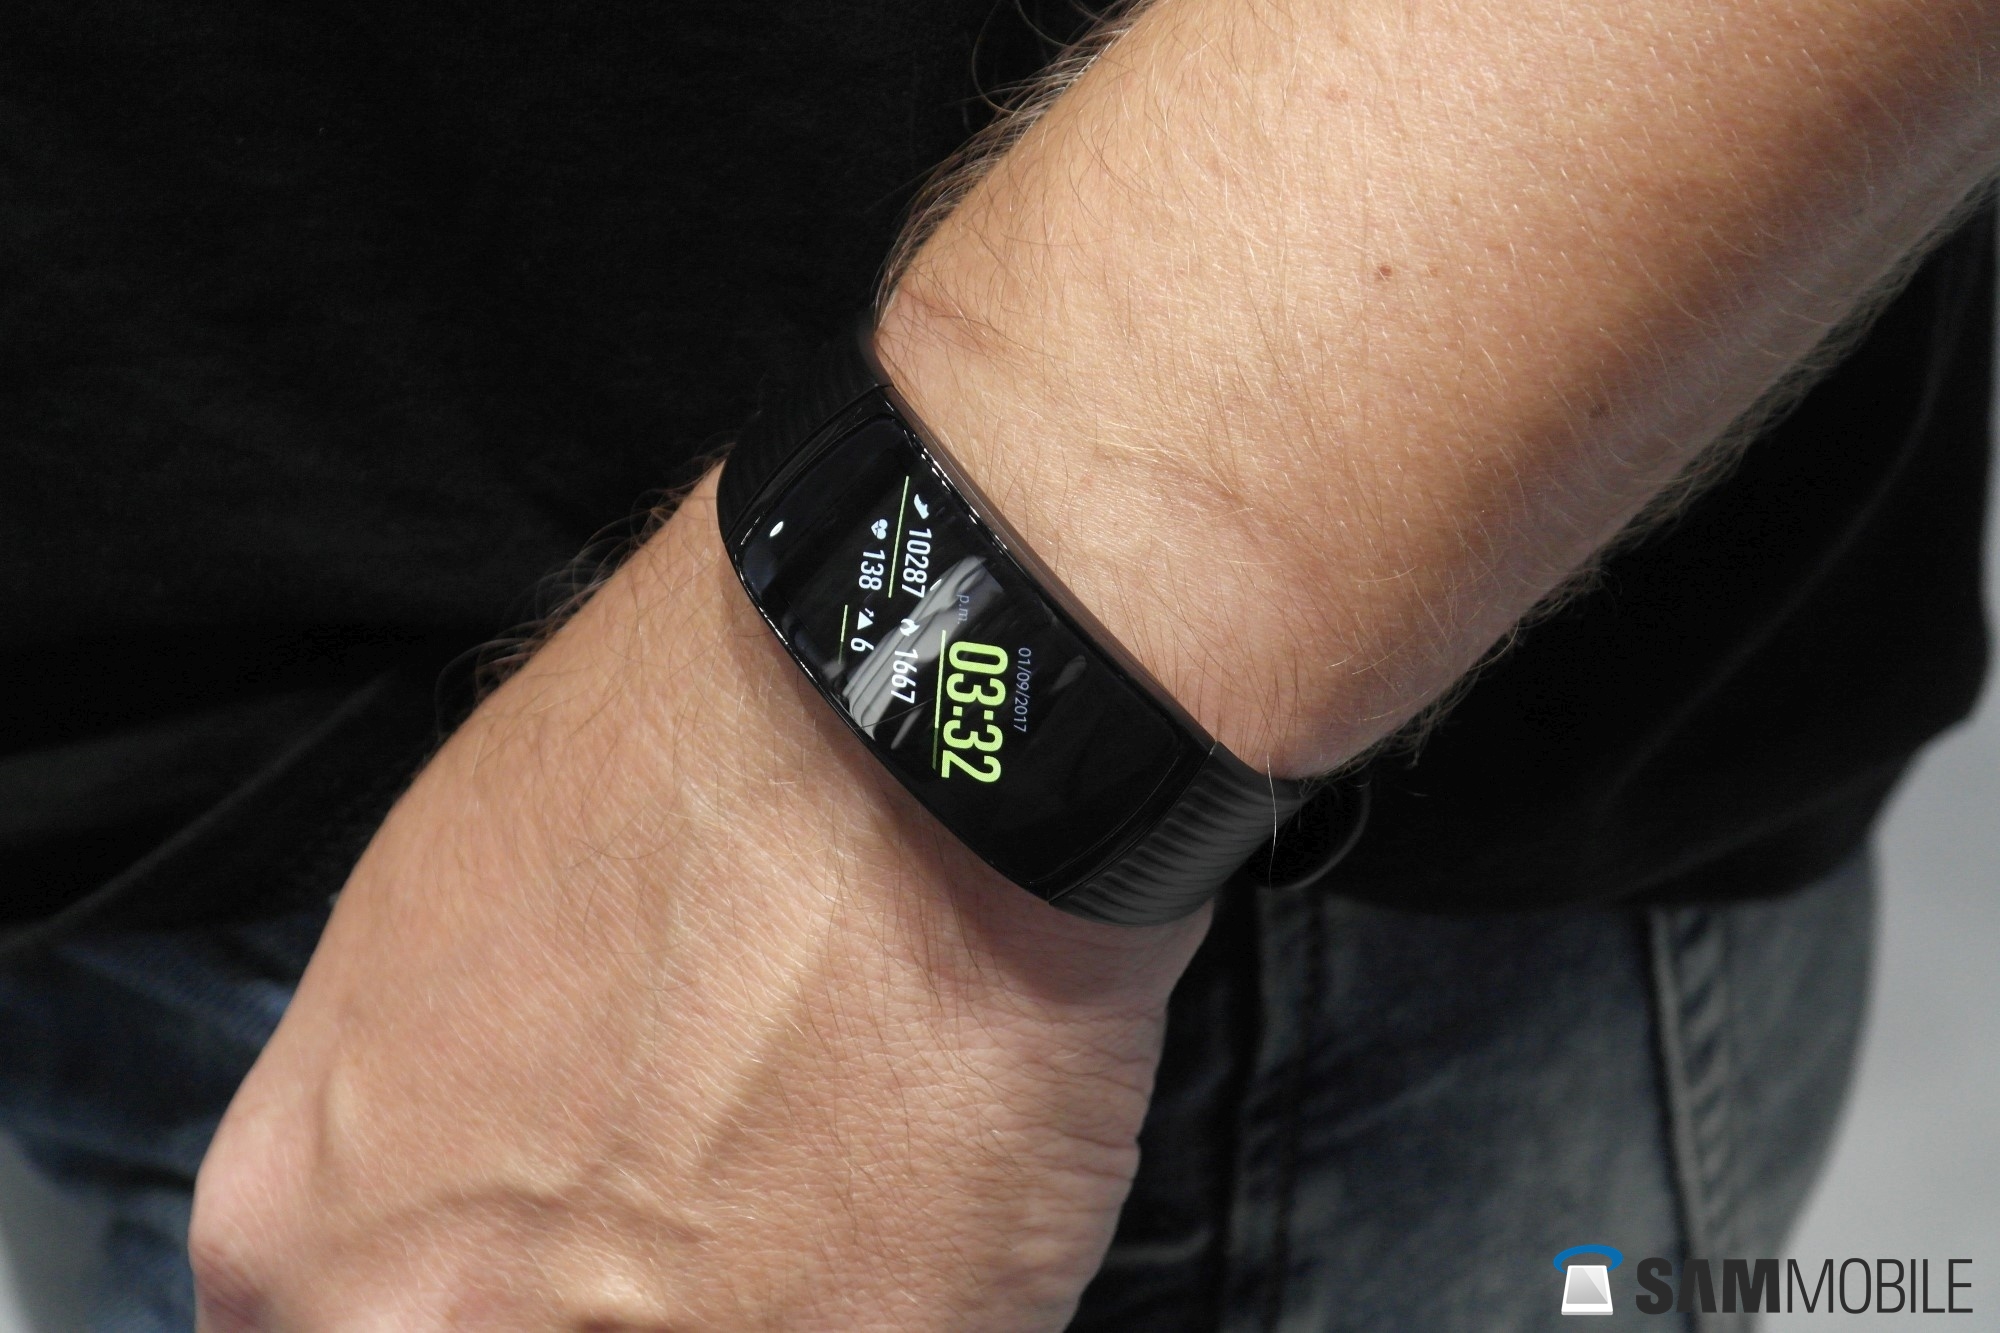 gear fit app for iphone